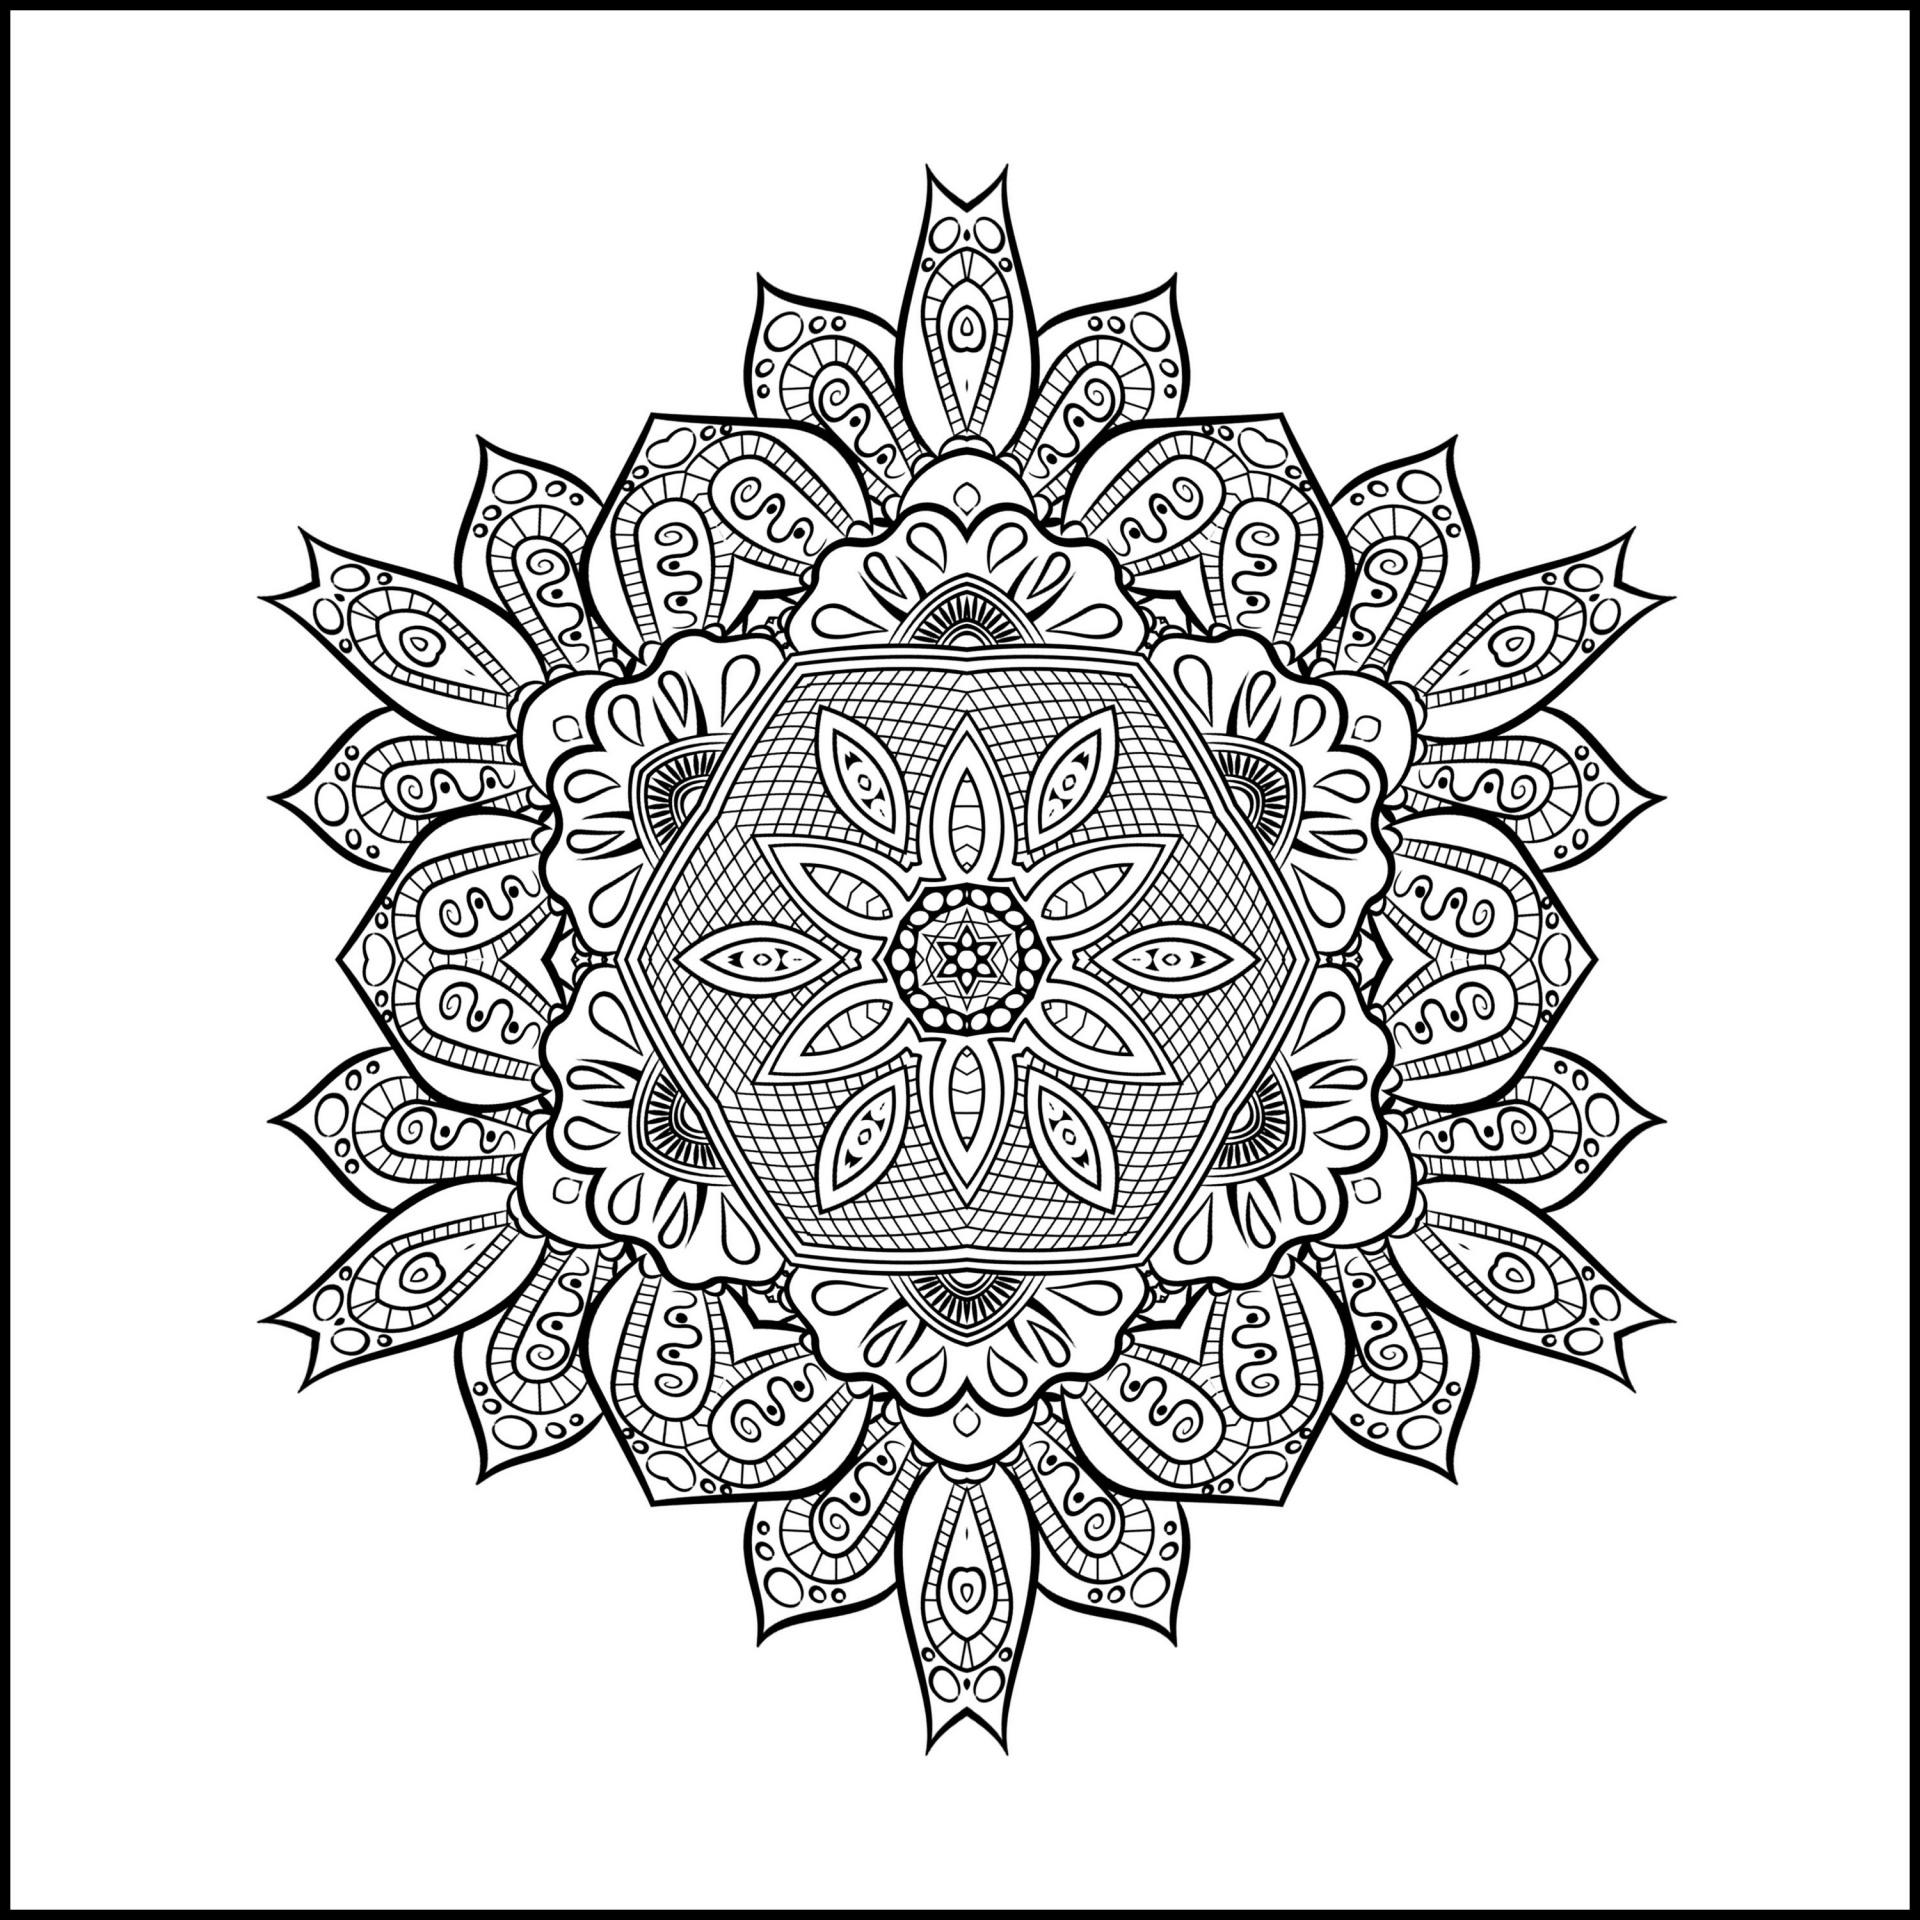 Coloring Page - 14